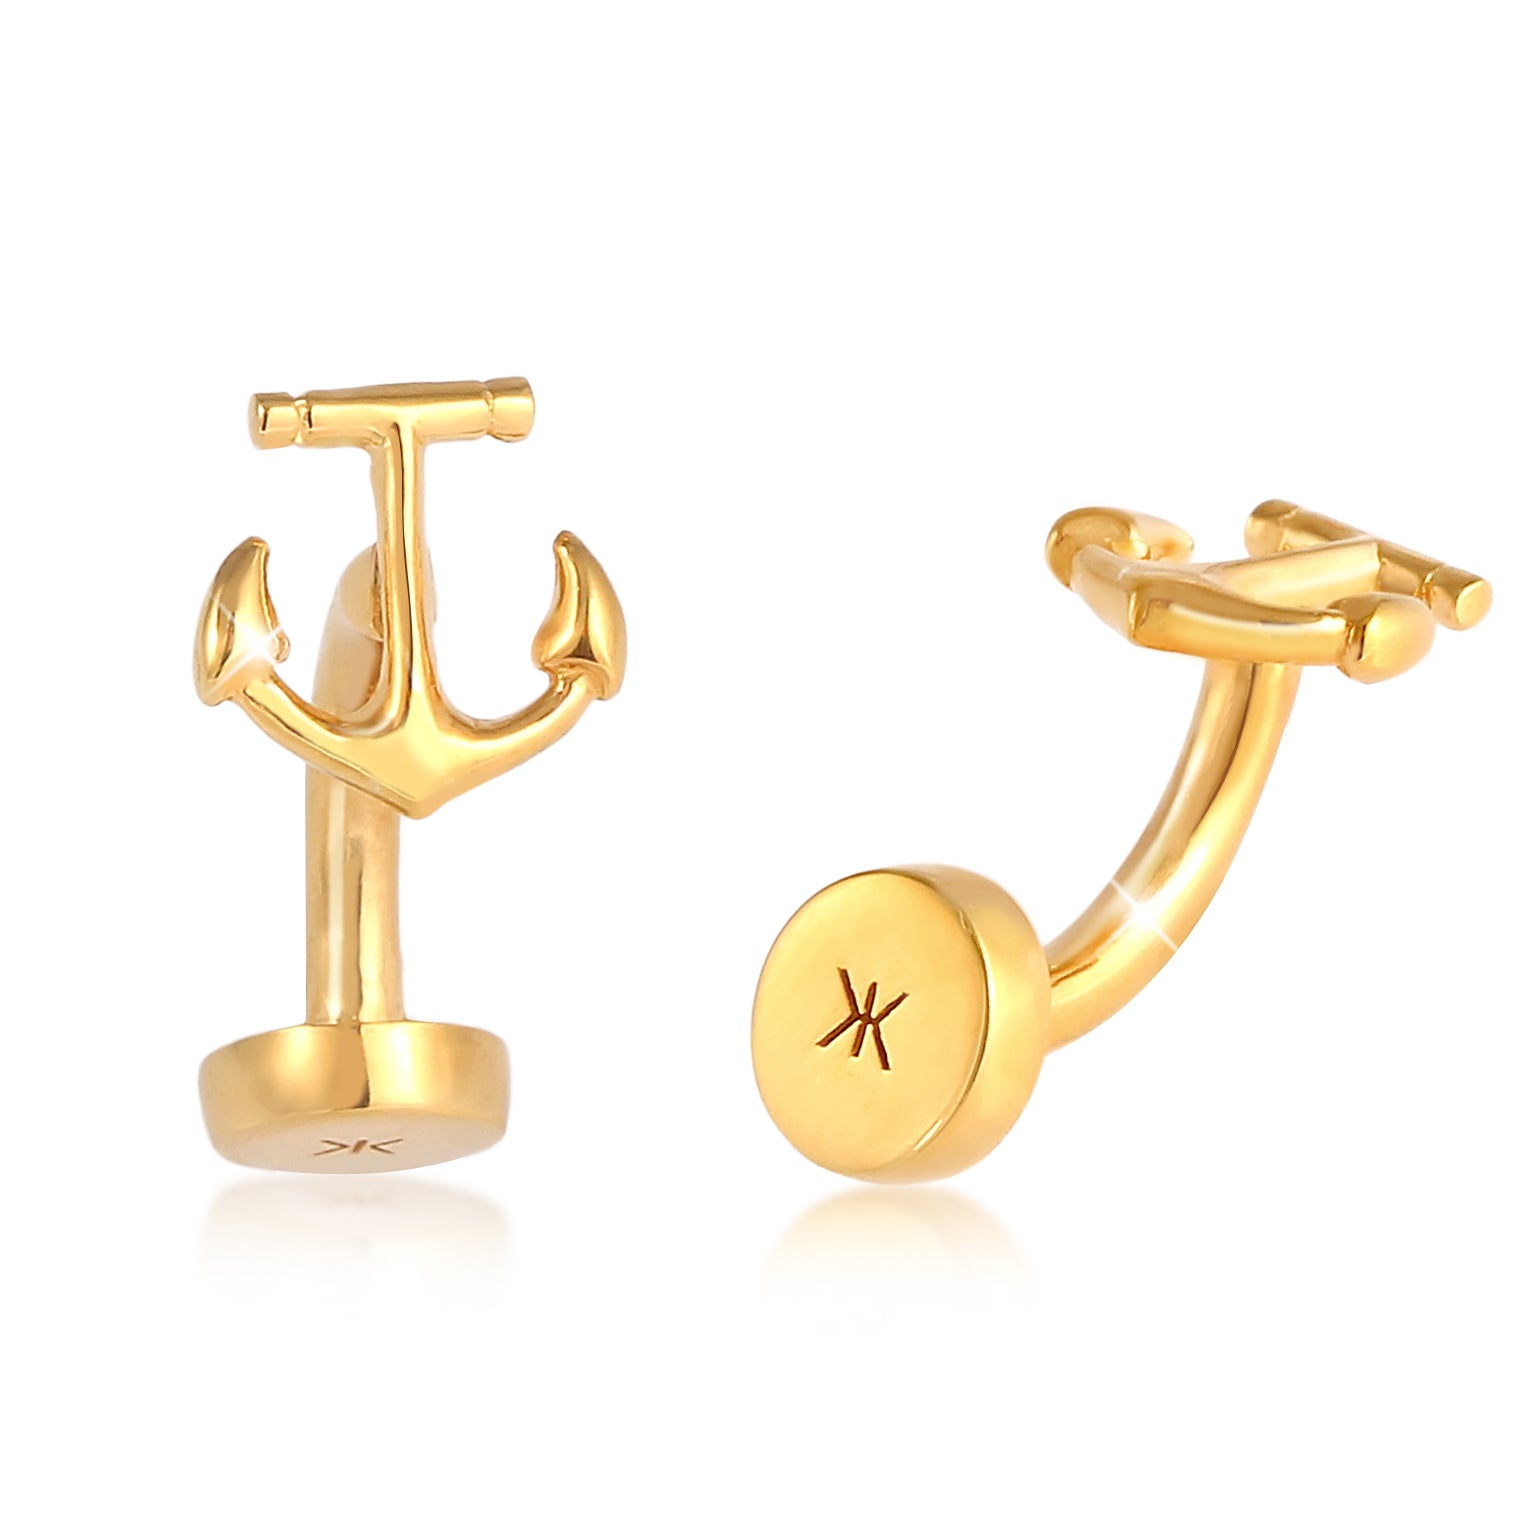 Noble cufflinks in at | Kuzzoi inexpensive silver